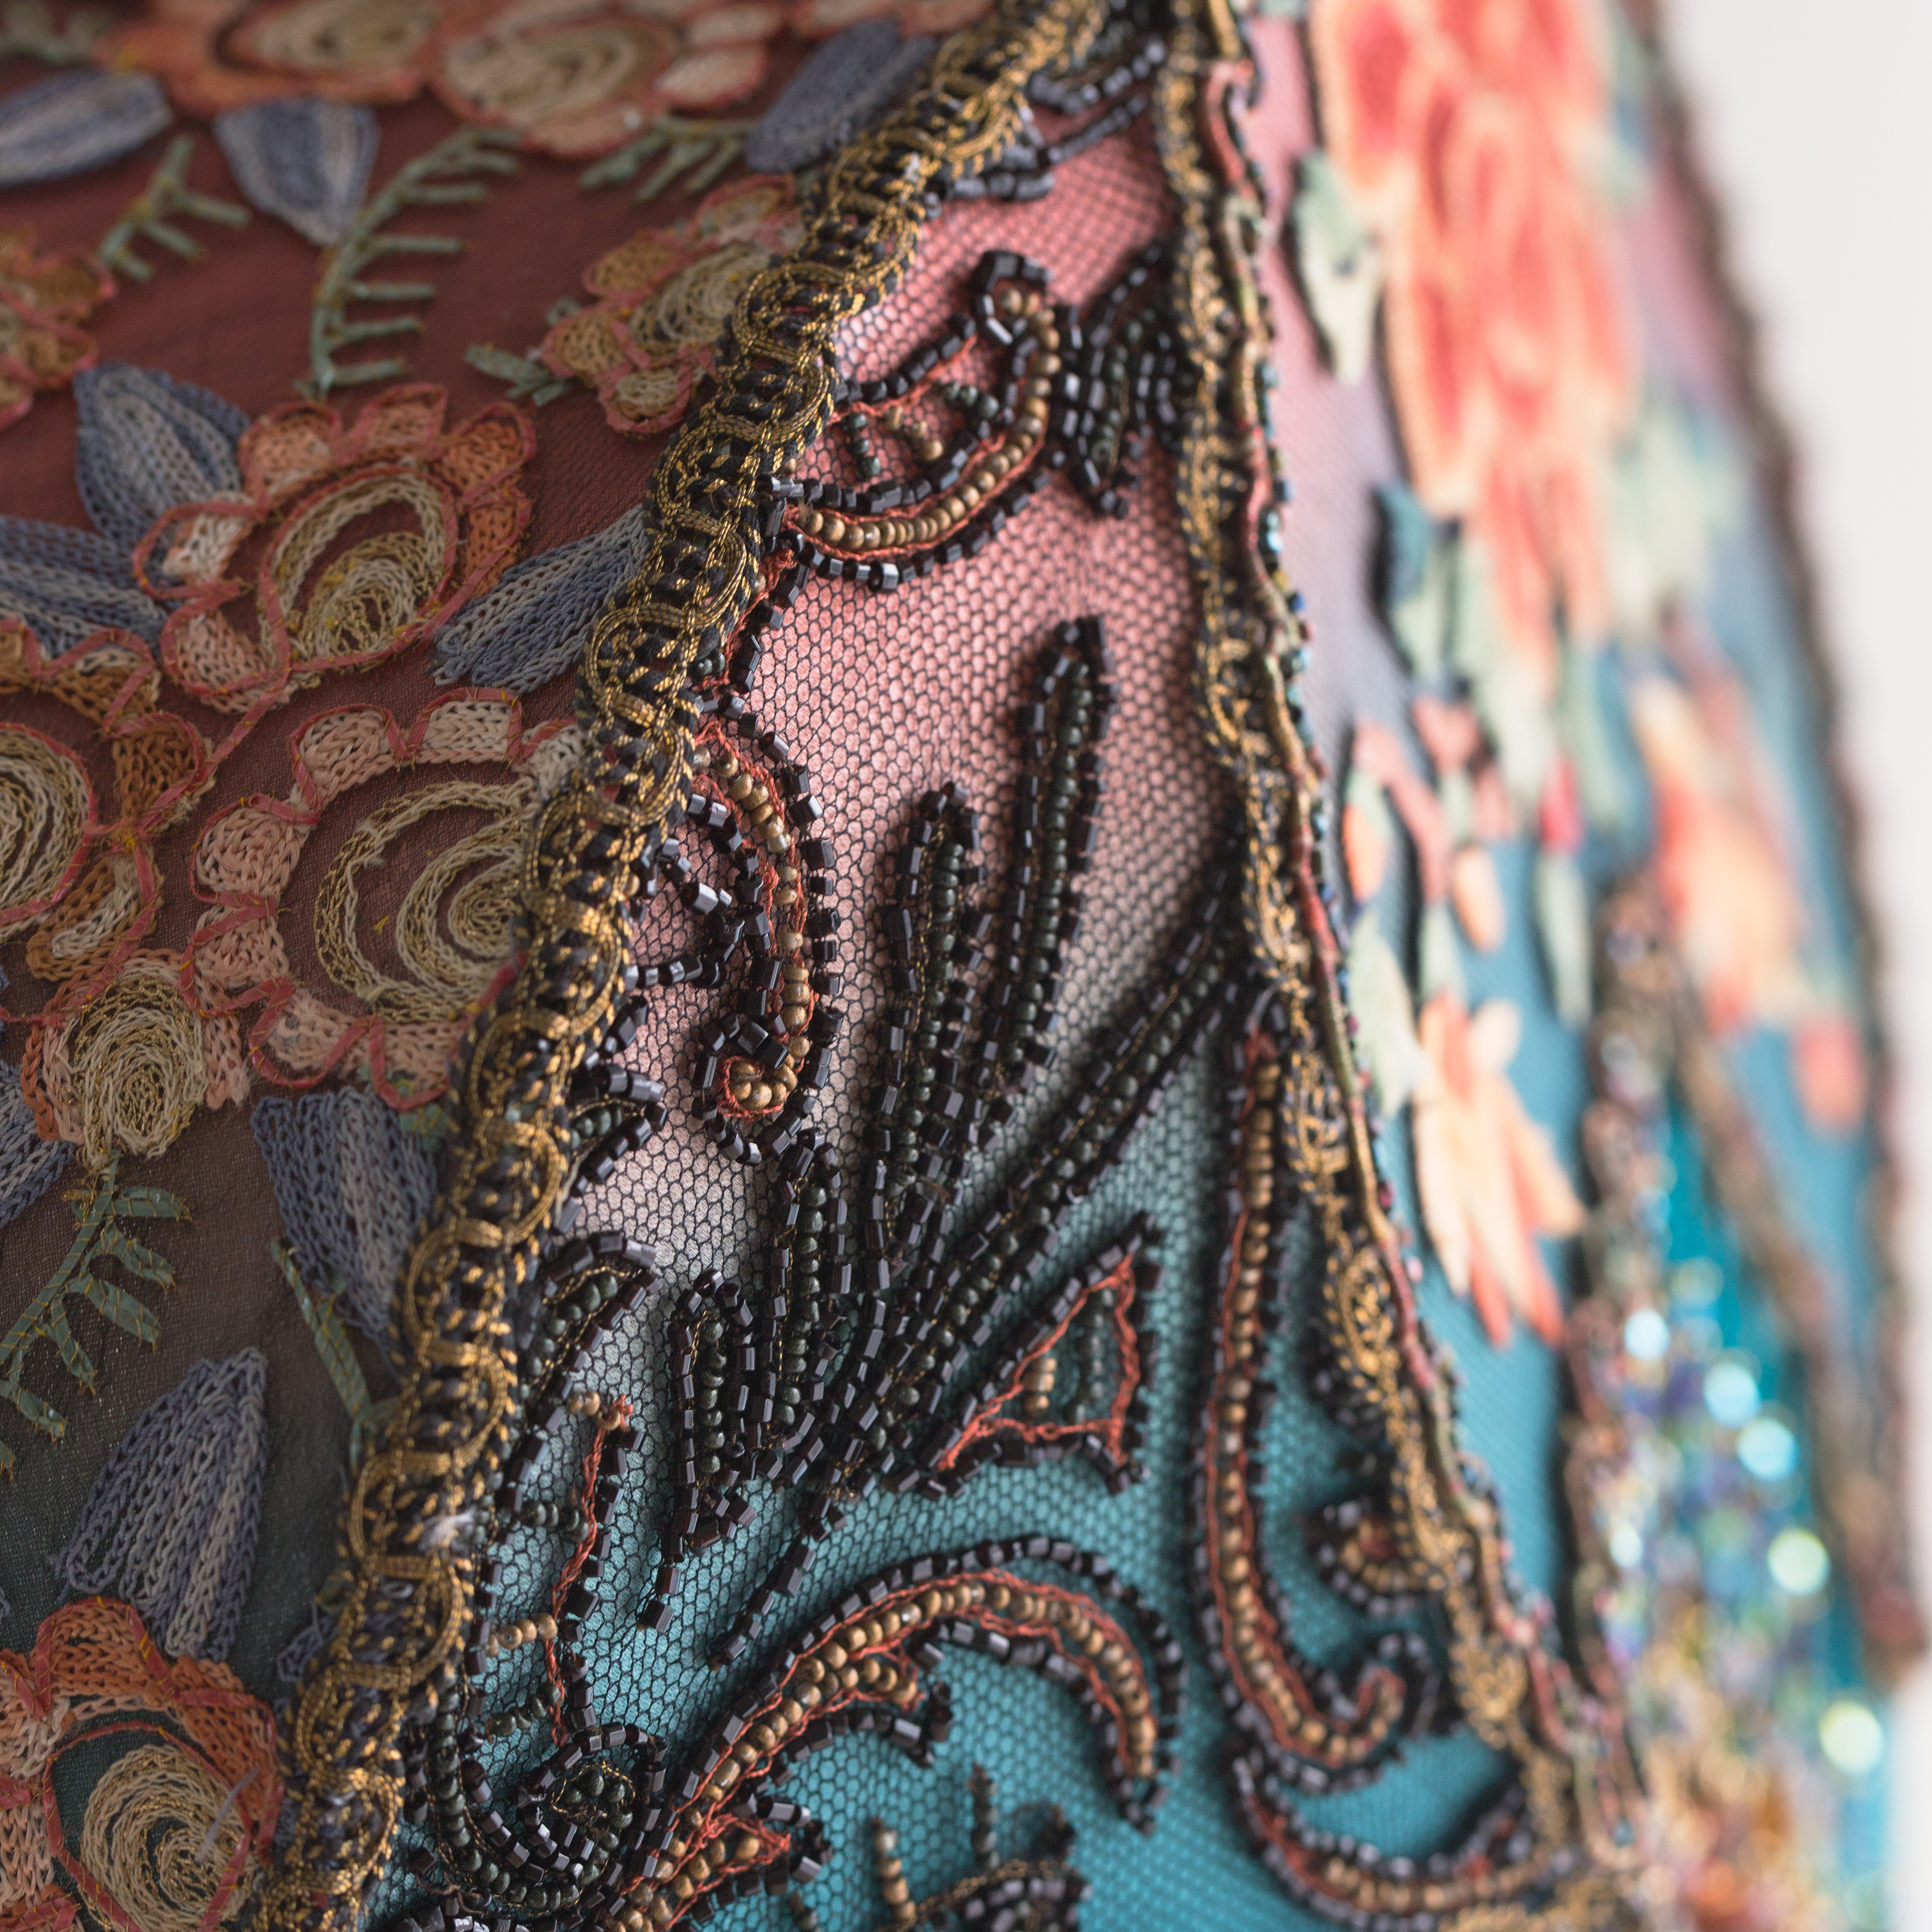 Detail of Chinoiserie Victorian Lampshade with Dragons and Antique Textiles